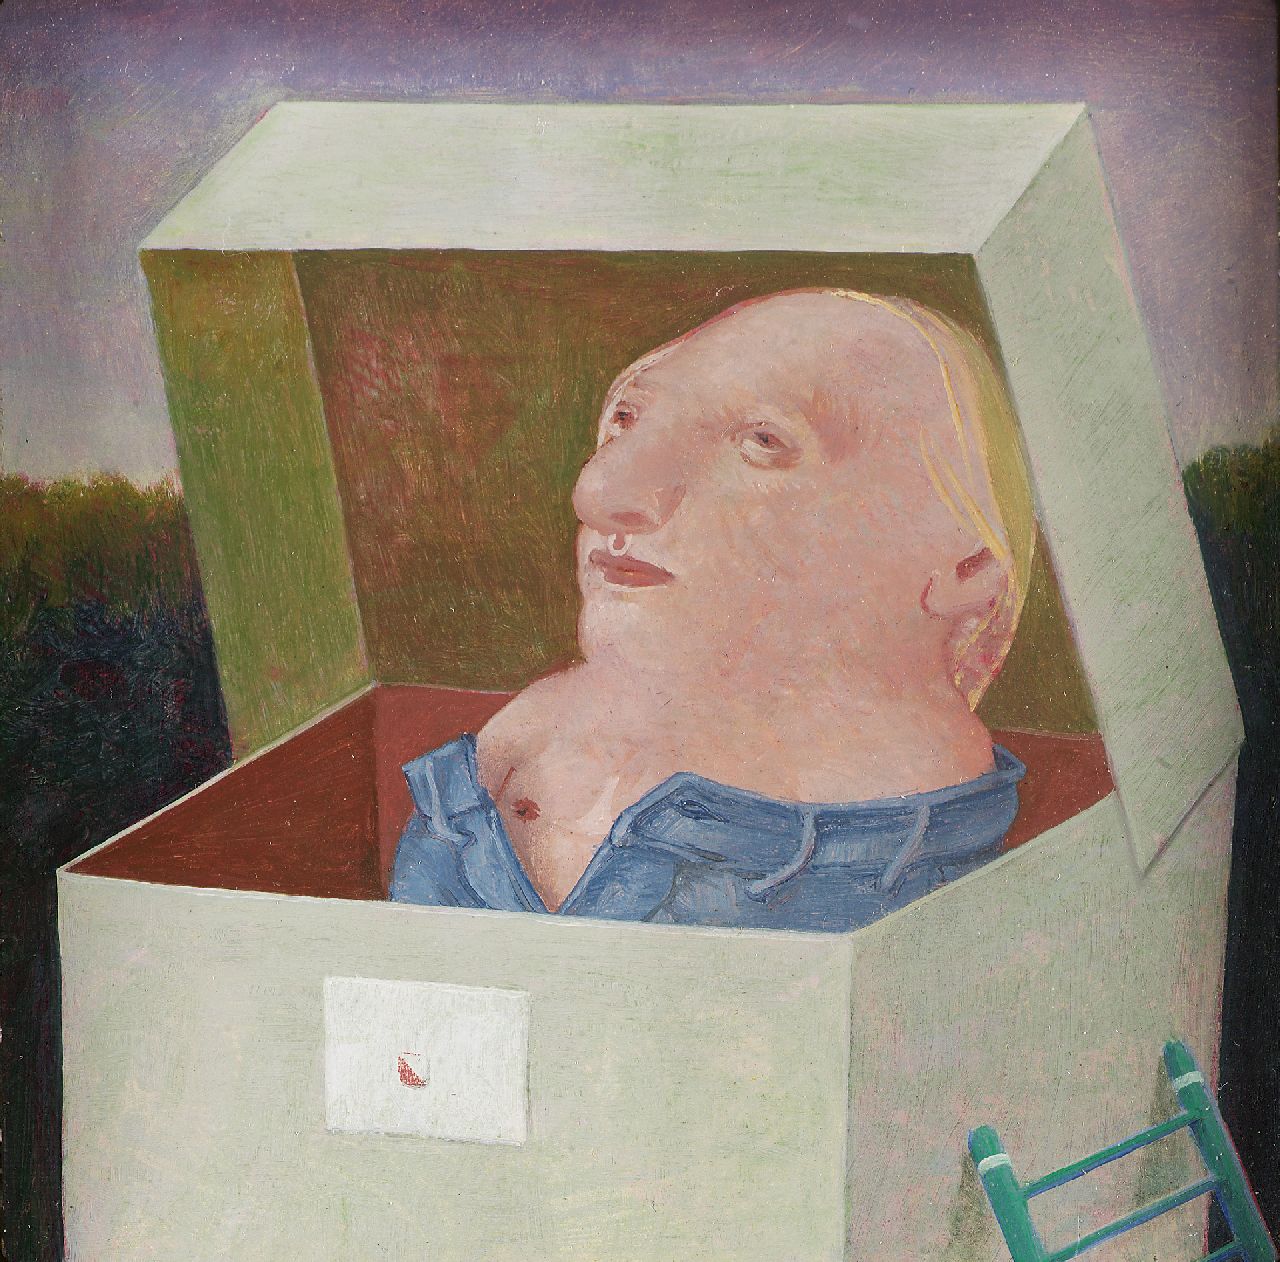 Peter van Poppel | Figure in a box, Öl auf Papier auf Holz, 10,0 x 10,0 cm, signed on the reverse und dated 1972 on the reverse